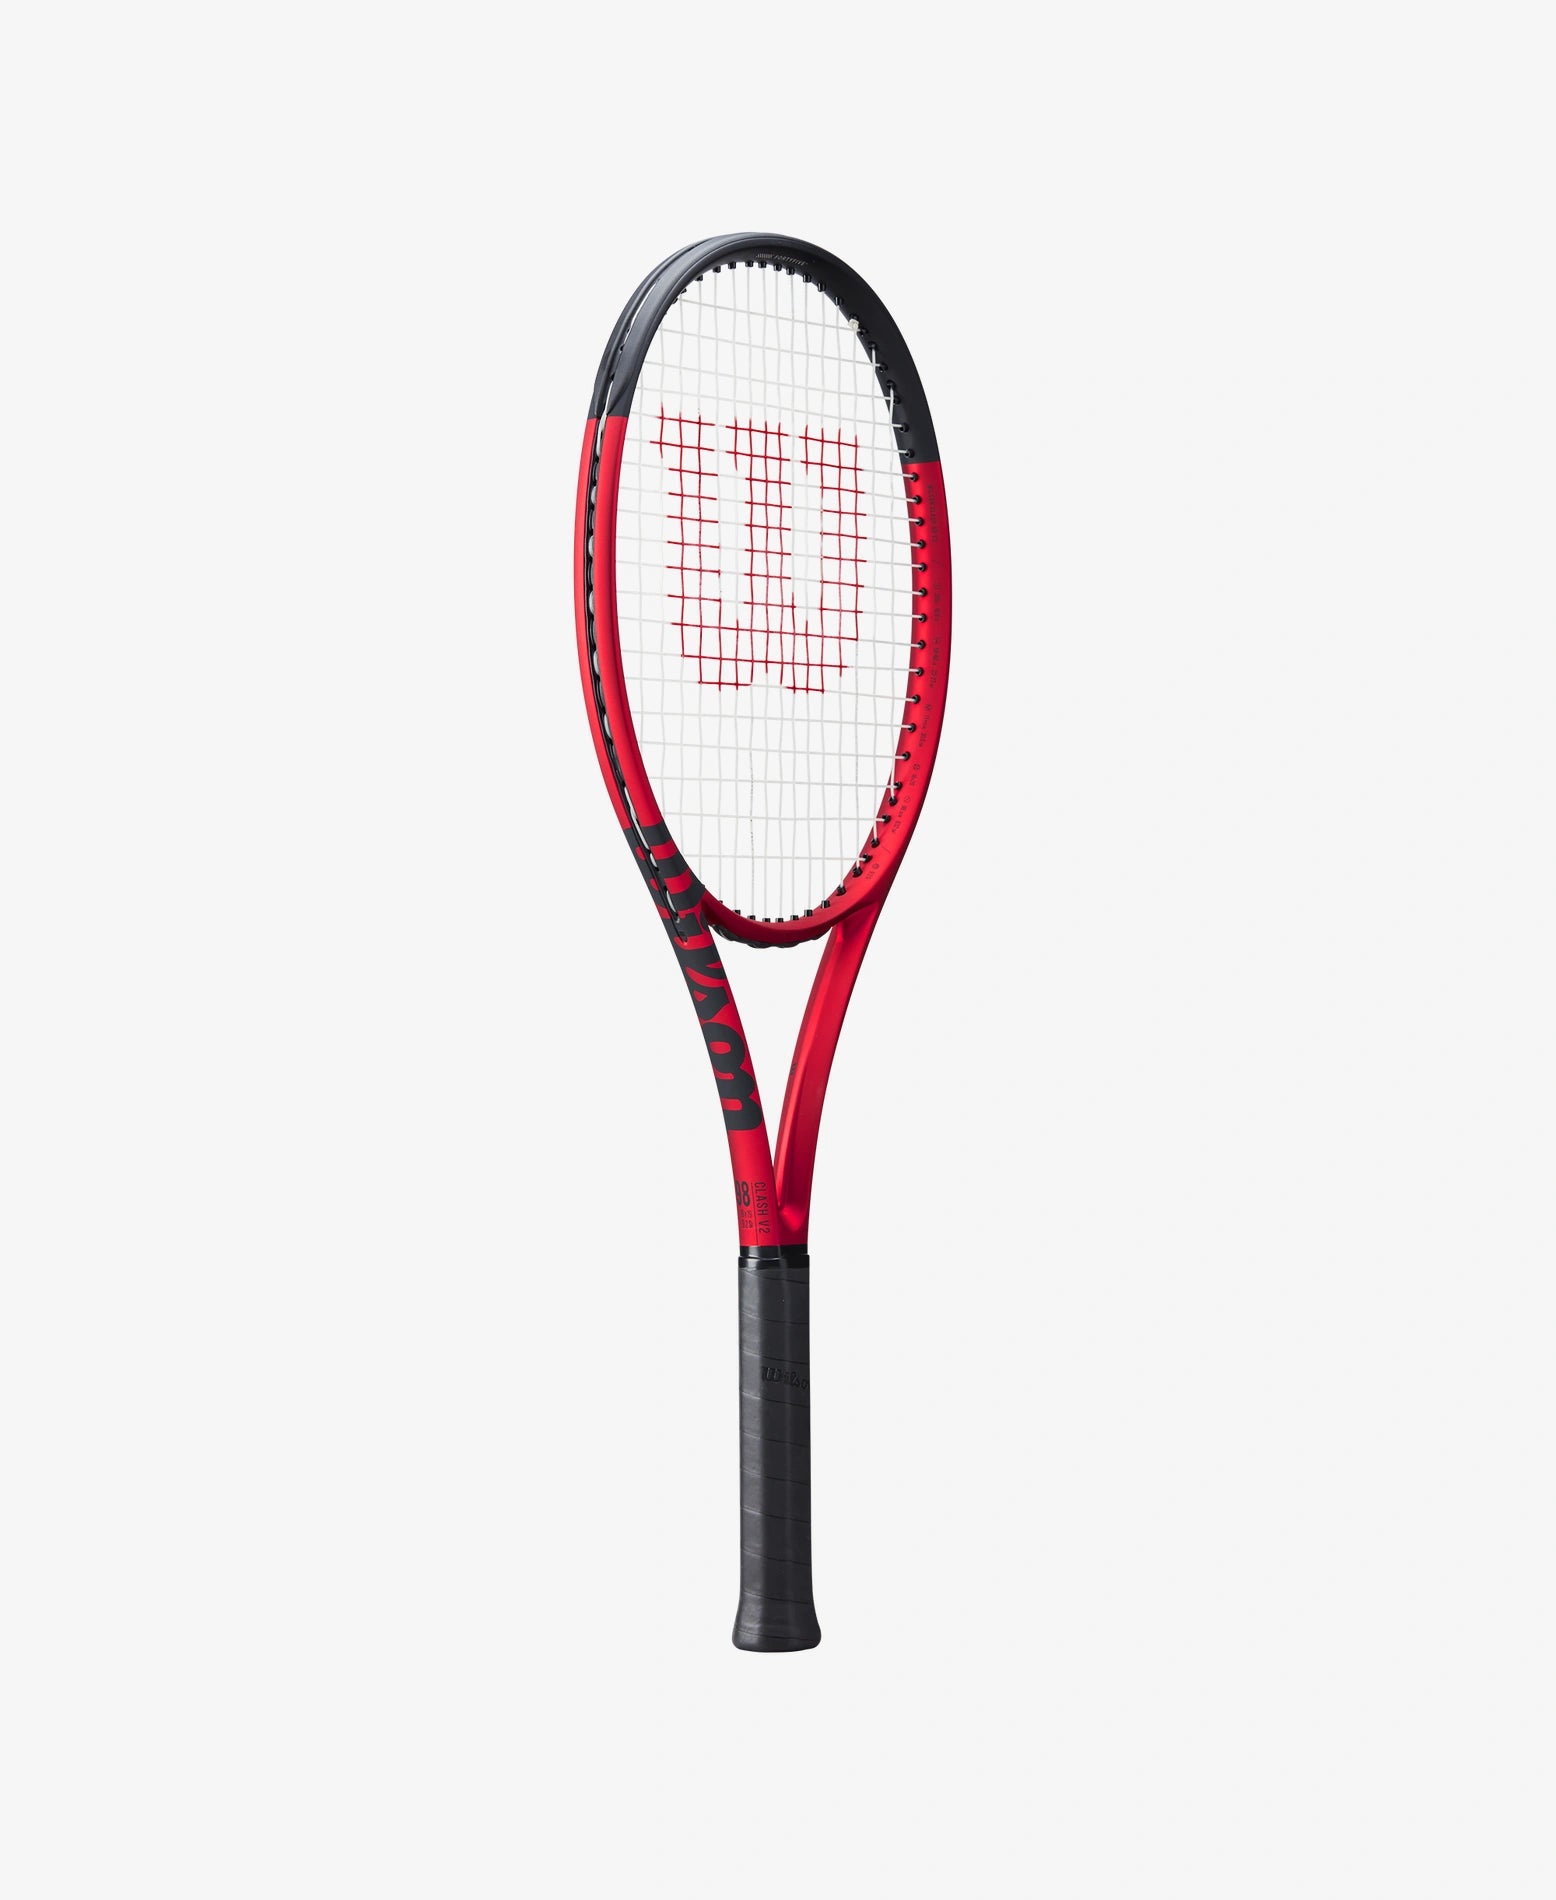 The Wilson Clash 98 V2.0 Tennis Racket available for sale at GSM Sports.    